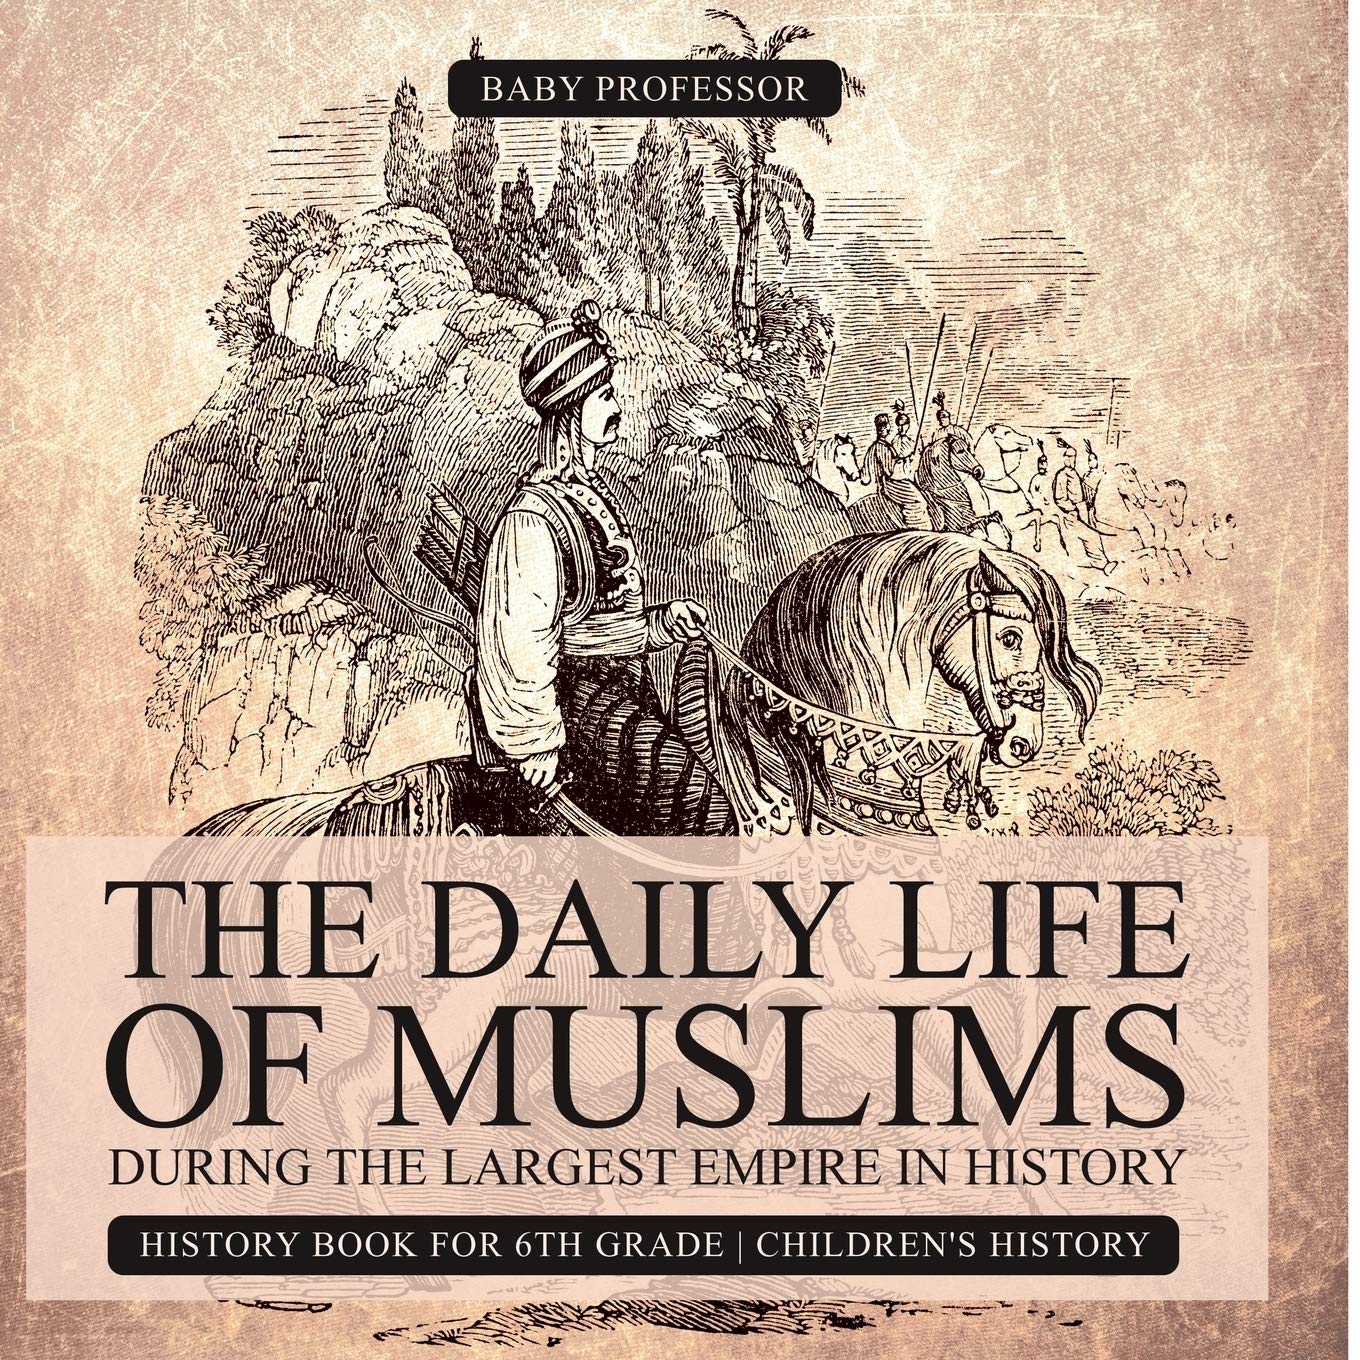 The Daily Life of Muslims During the Largest Empire in History